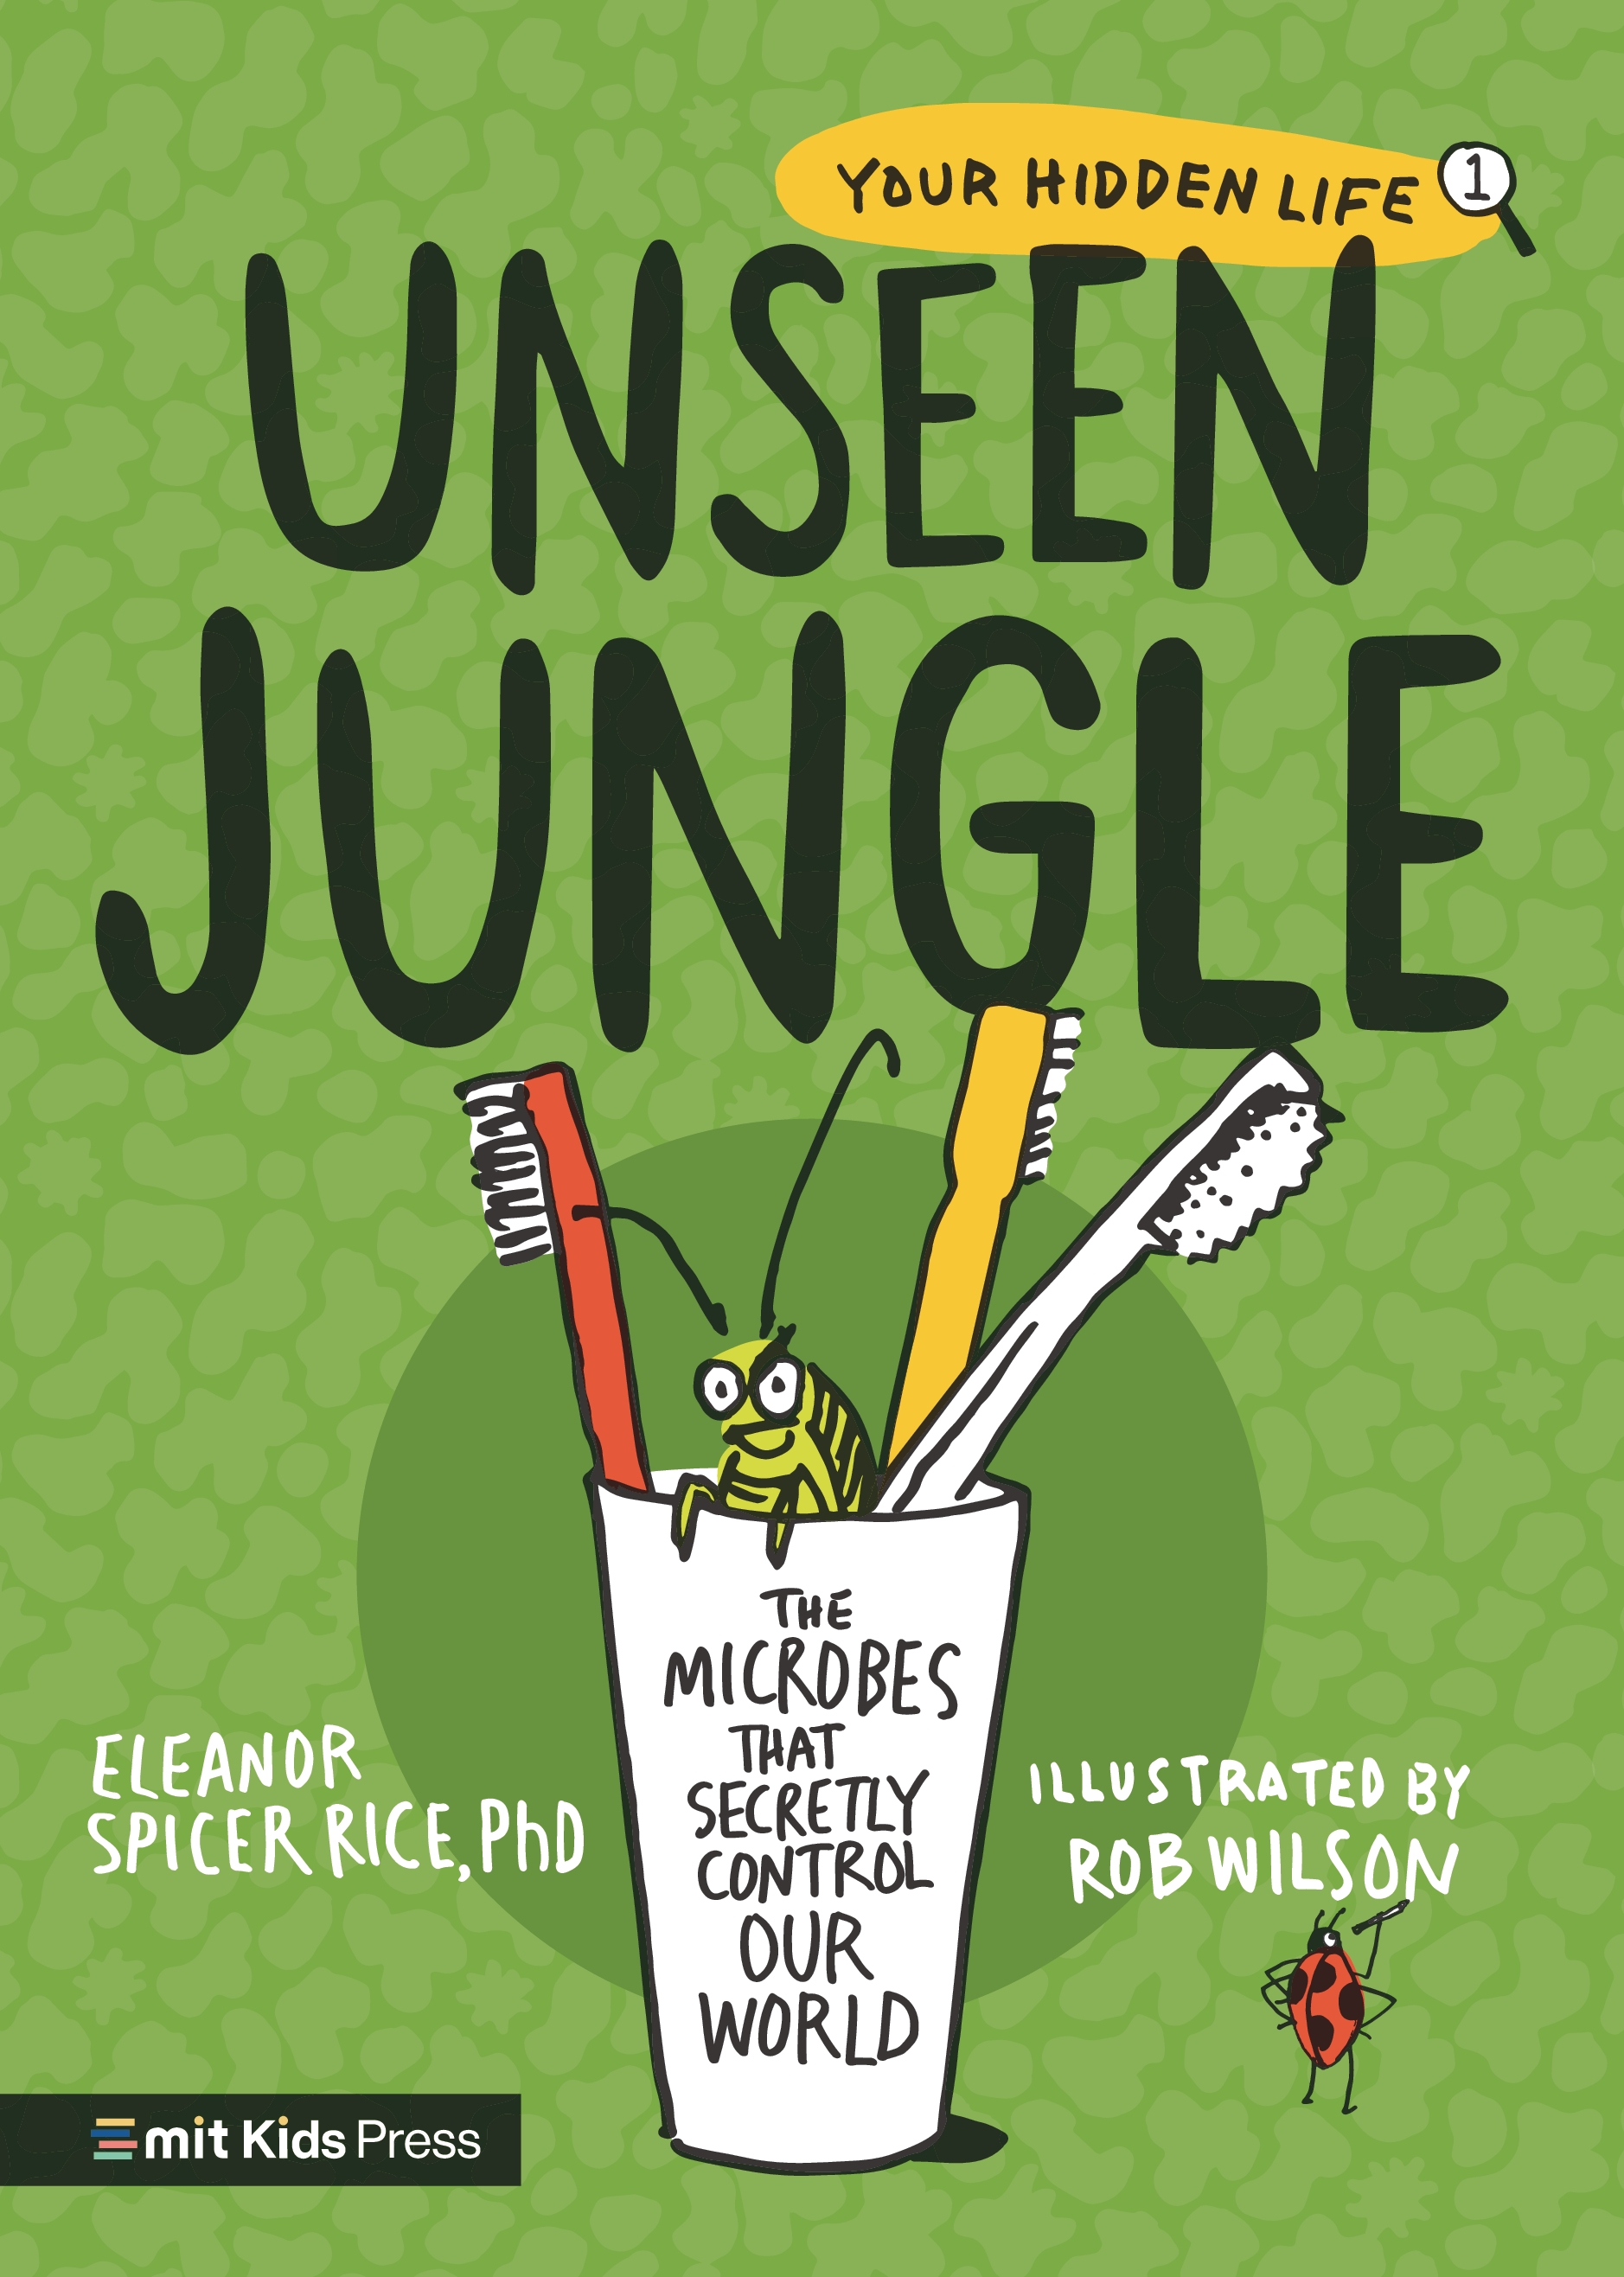 Unseen-Jungle-The-Microbes-That-Secretly-Control-Our-World